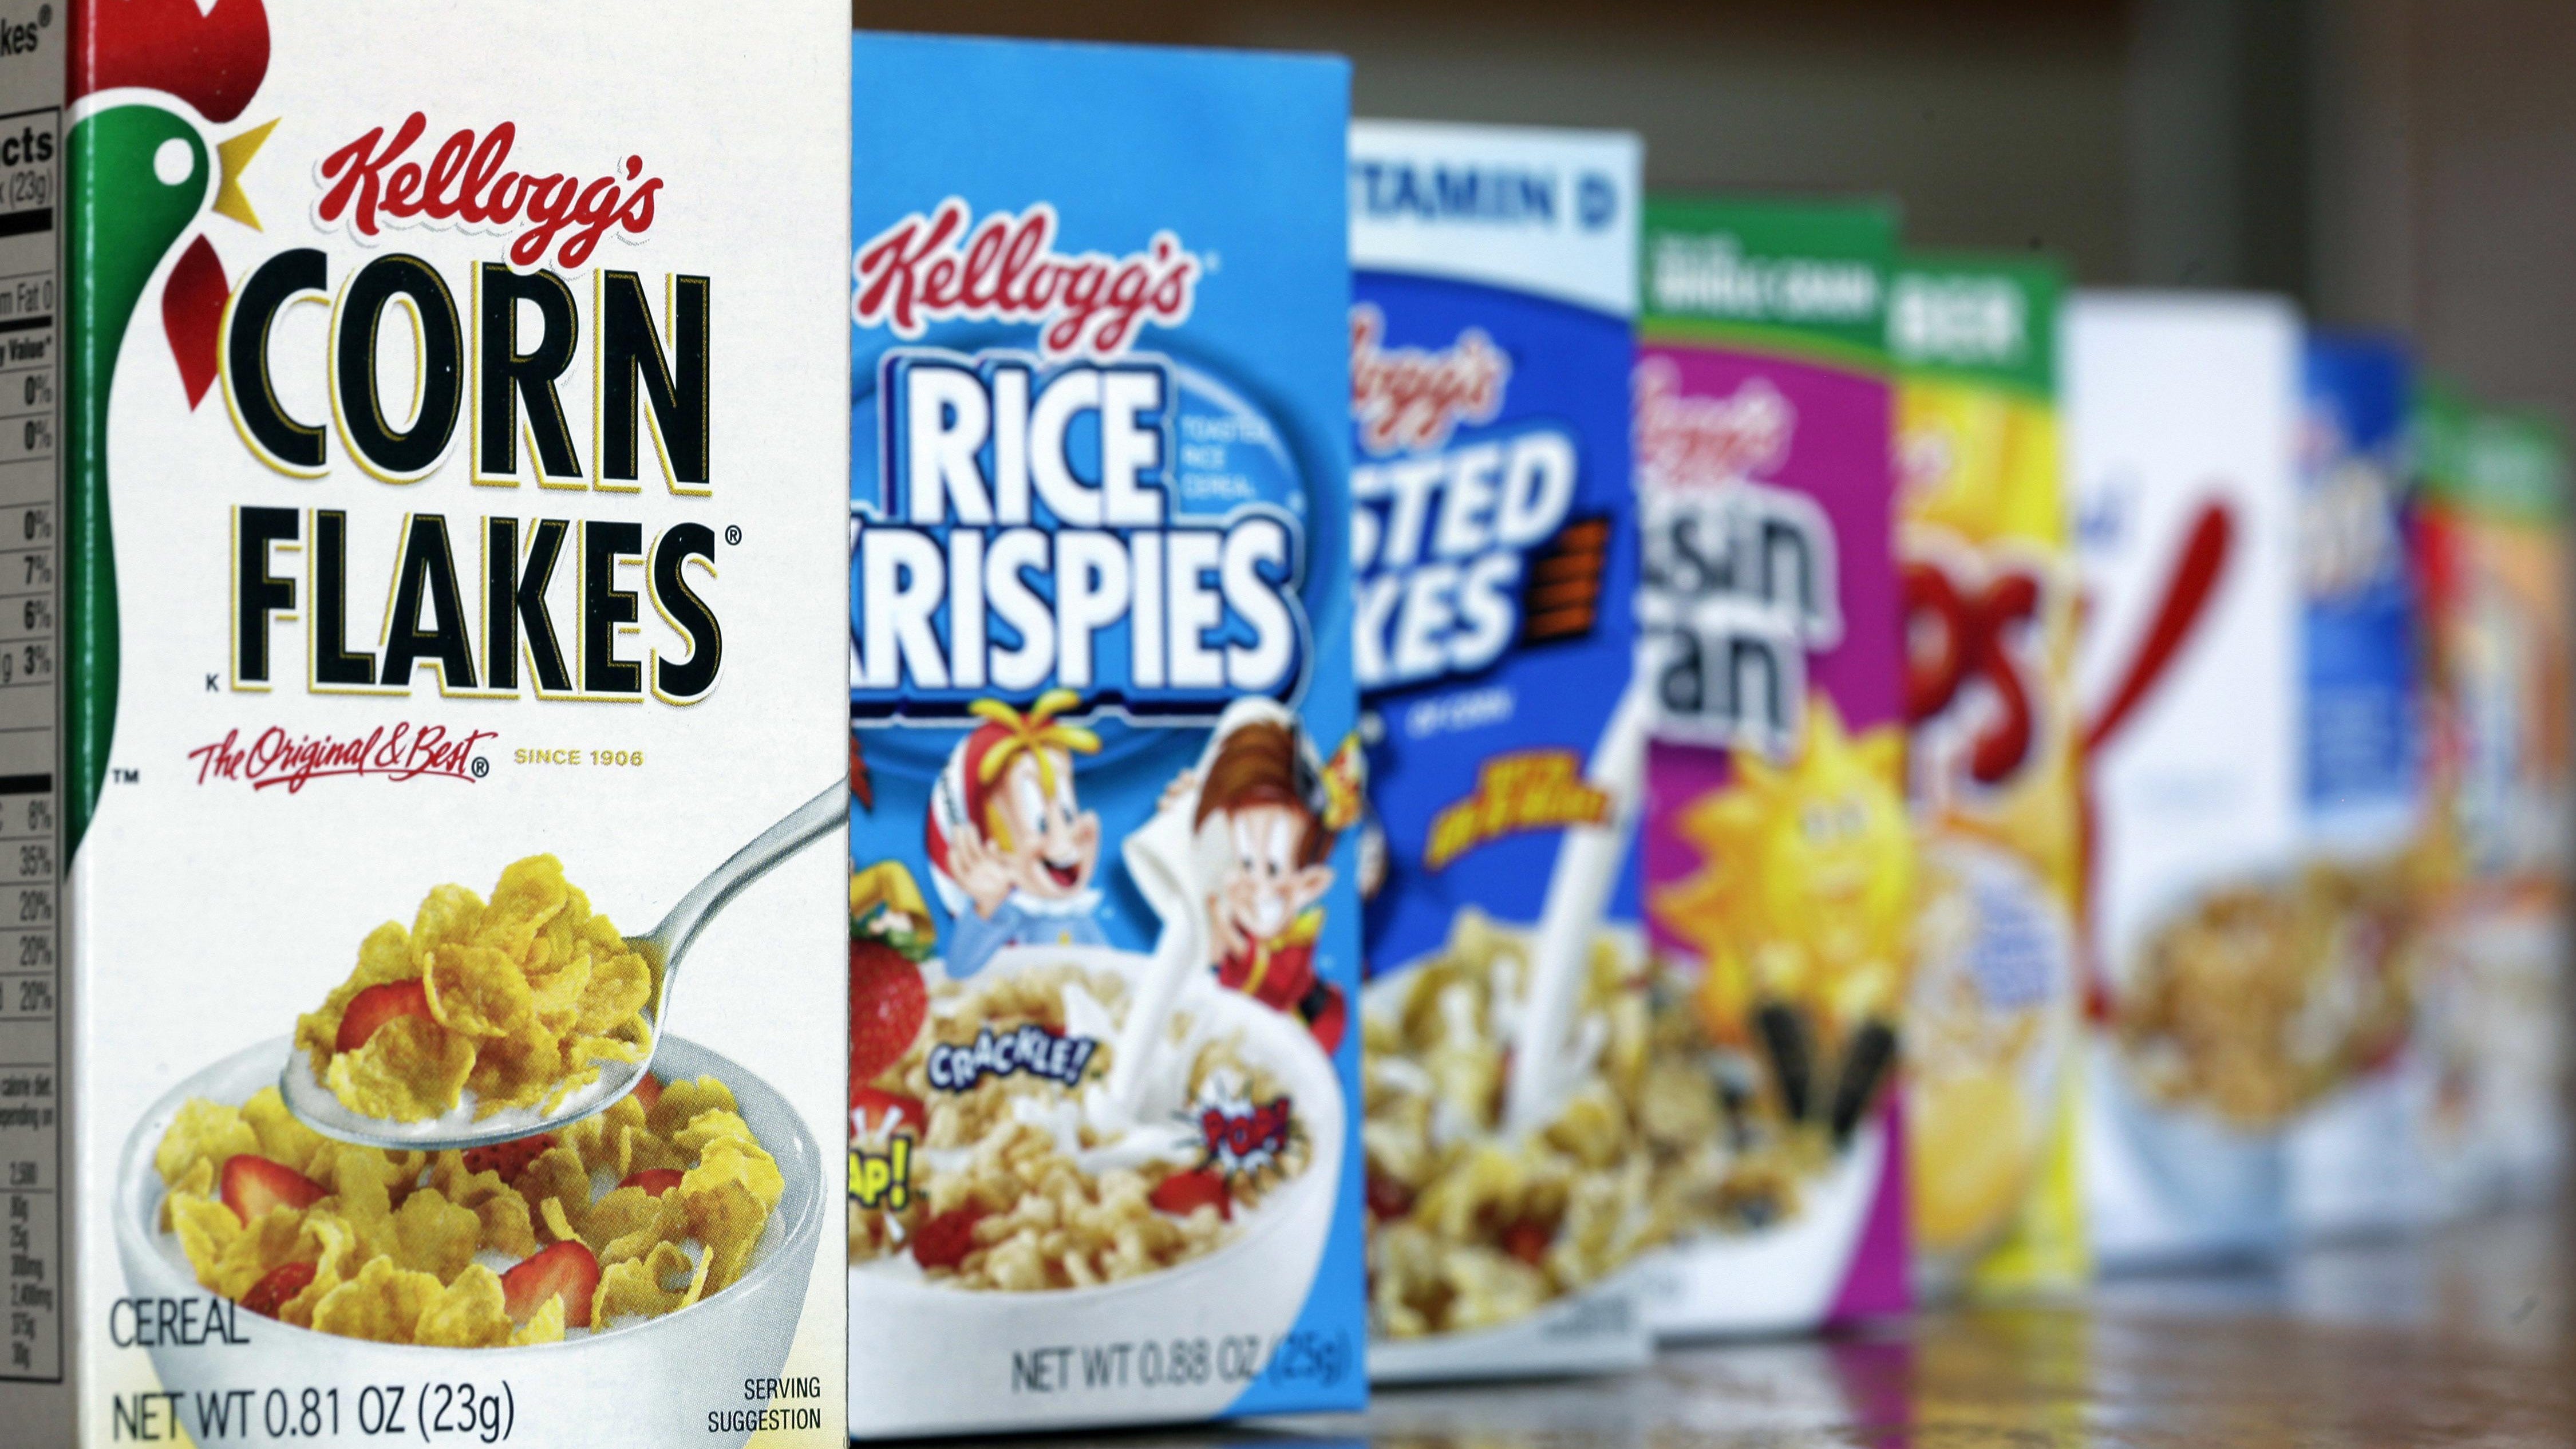 The Netherlands-based consumer group Changing Markets says Kellogg Co. has reduced vitamins and micronutrients in some of the most popular breakfast cereals in Mexico.